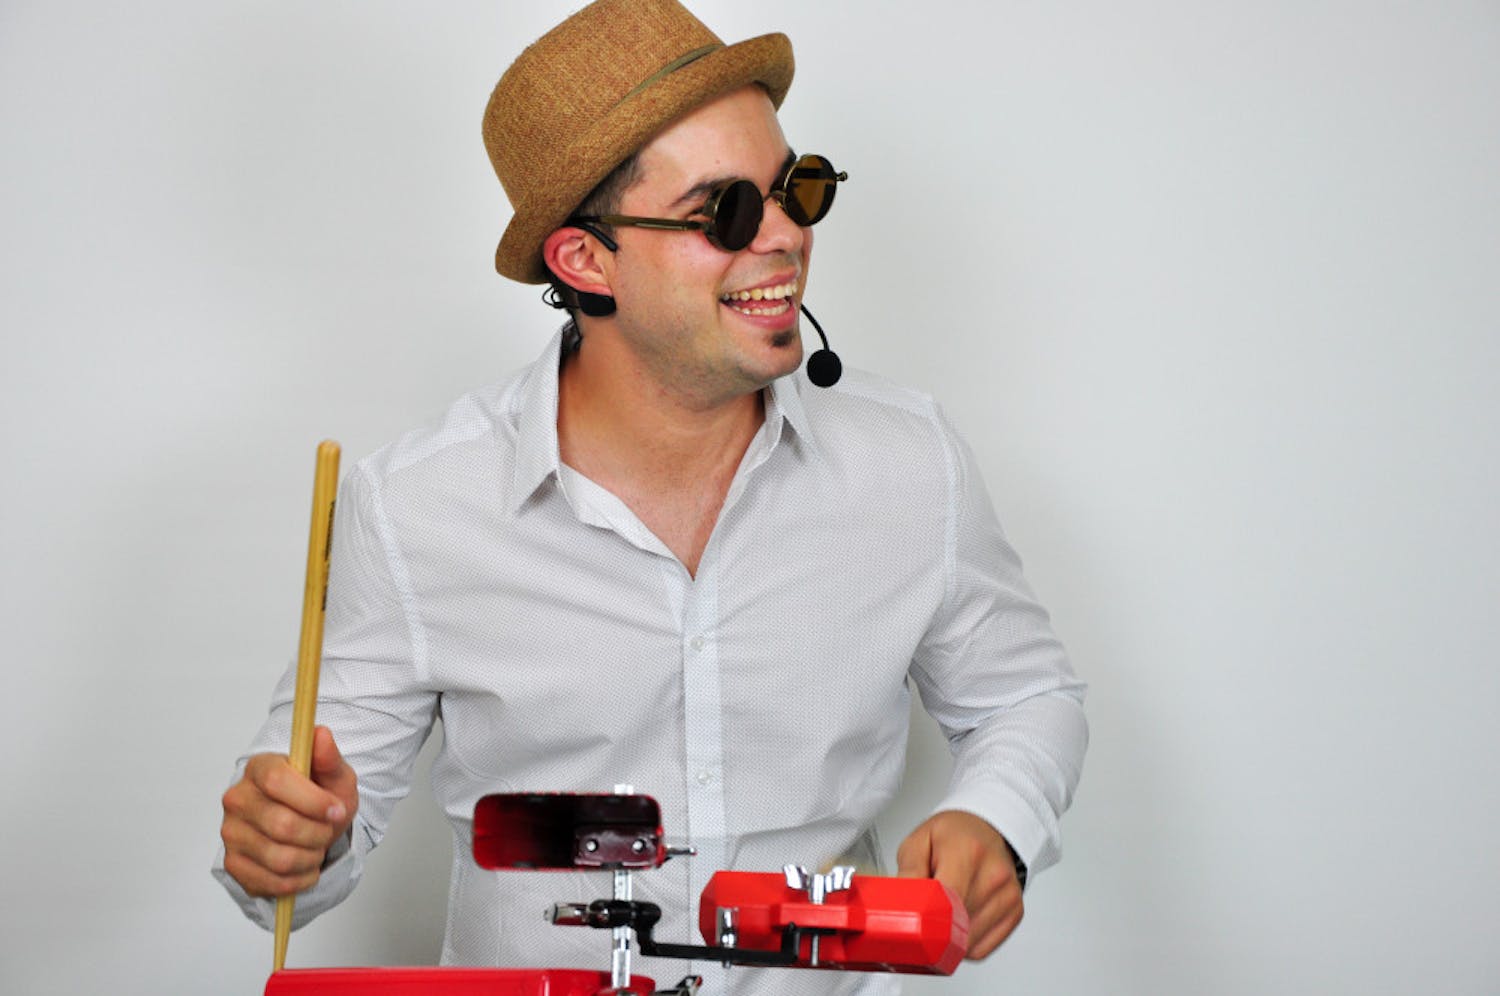 Elio Piedra, 27, a Latin DJ in Gainesville, first learned how to play the drums in Cuba when he was in the fourth grade. He moved to the U.S. in 2010, when he was 19. “For most, it’s like two pieces of wood,” he said. “But for me, it’s like extensions of my arms.”